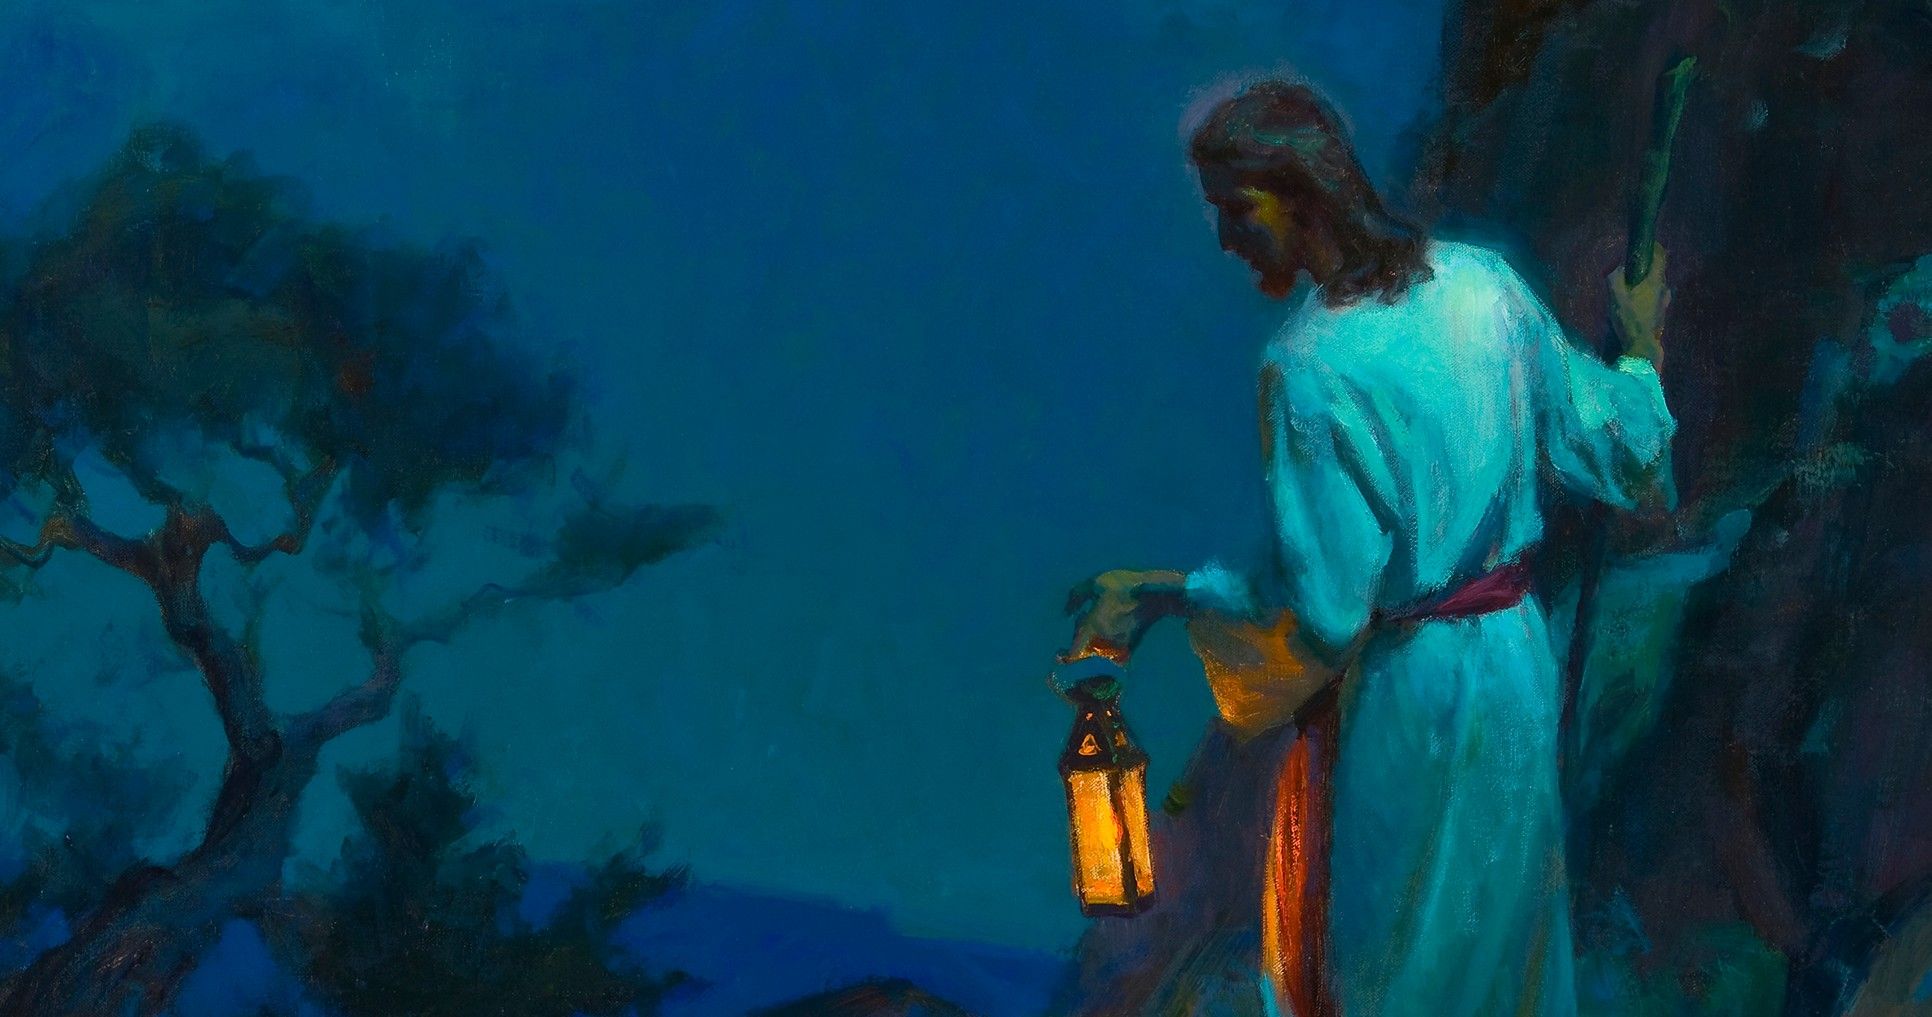 Saving That Which Was Lost, by Michael T. Malm. Image via Church of Jesus Christ.